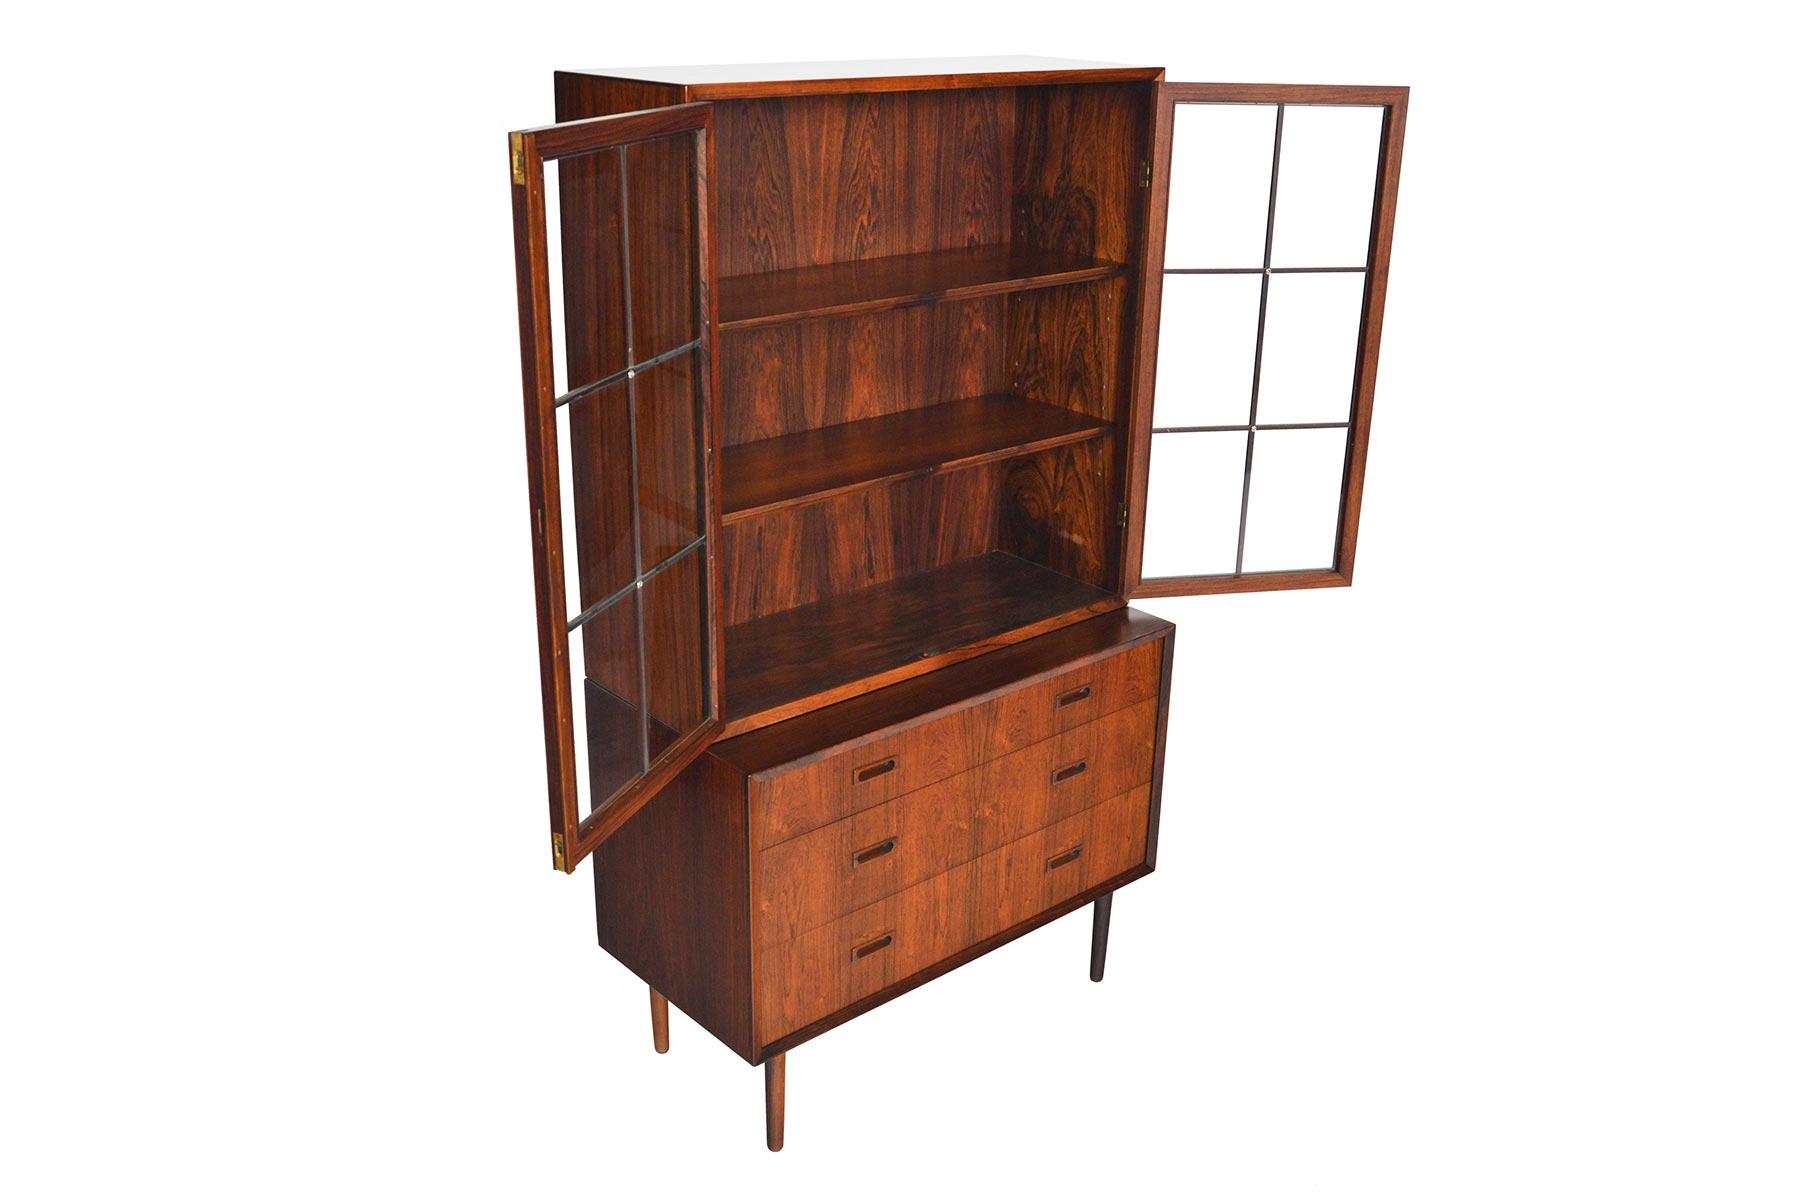 This versatile storage piece was manufactured by Lyby in the 1960s. Beautifully crafted the base of this piece is a four-drawer gentleman’s chest. A removable hutch with glass panels sits atop. Locking doors open to reveal two bays with adjustable